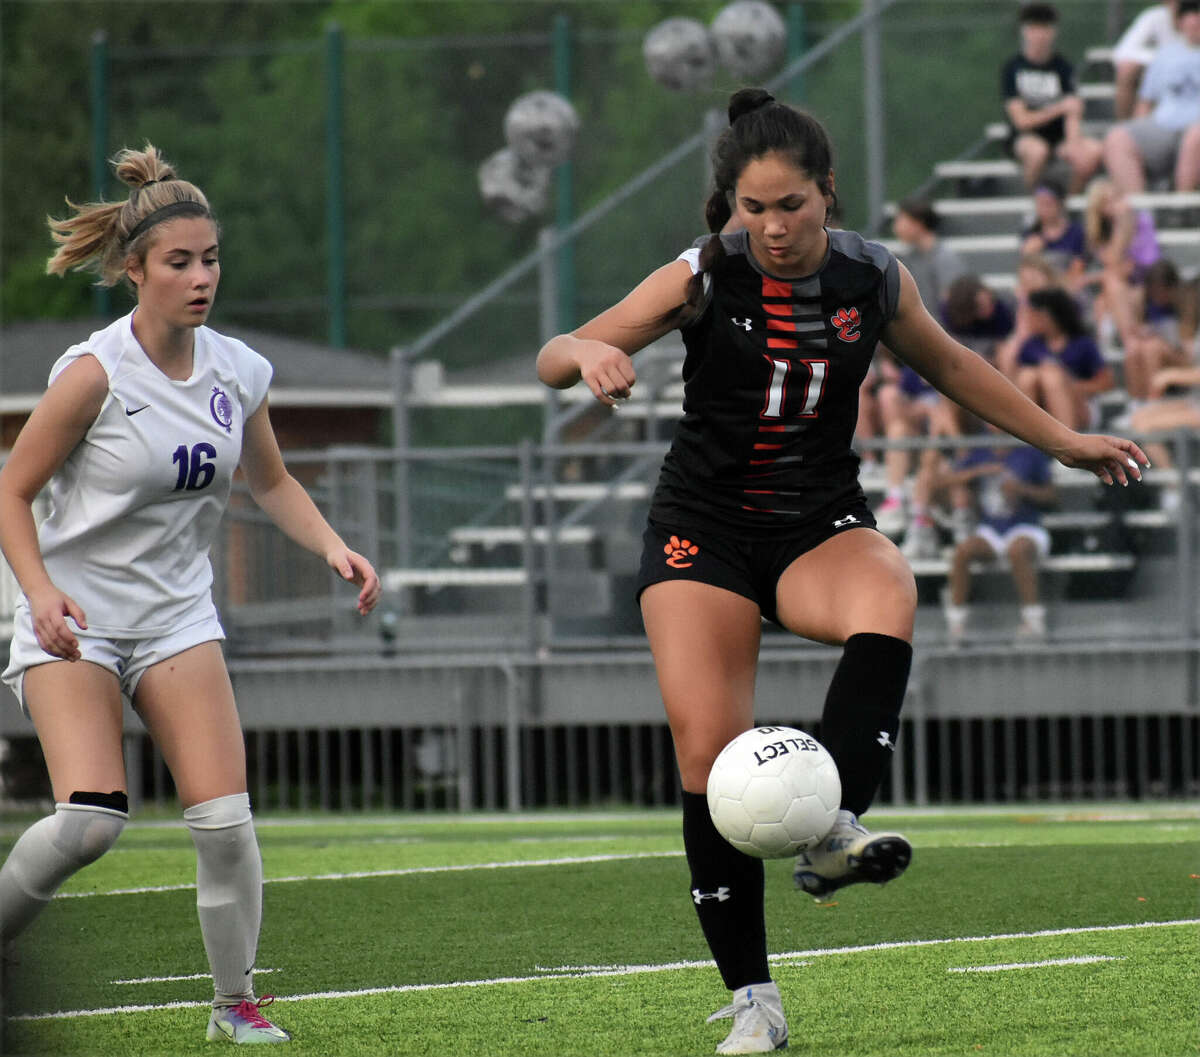 Edwardsville's Olivia Baca settles the ball against Collinsville on Friday inside the District 7 Sports Complex in Edwardsville.